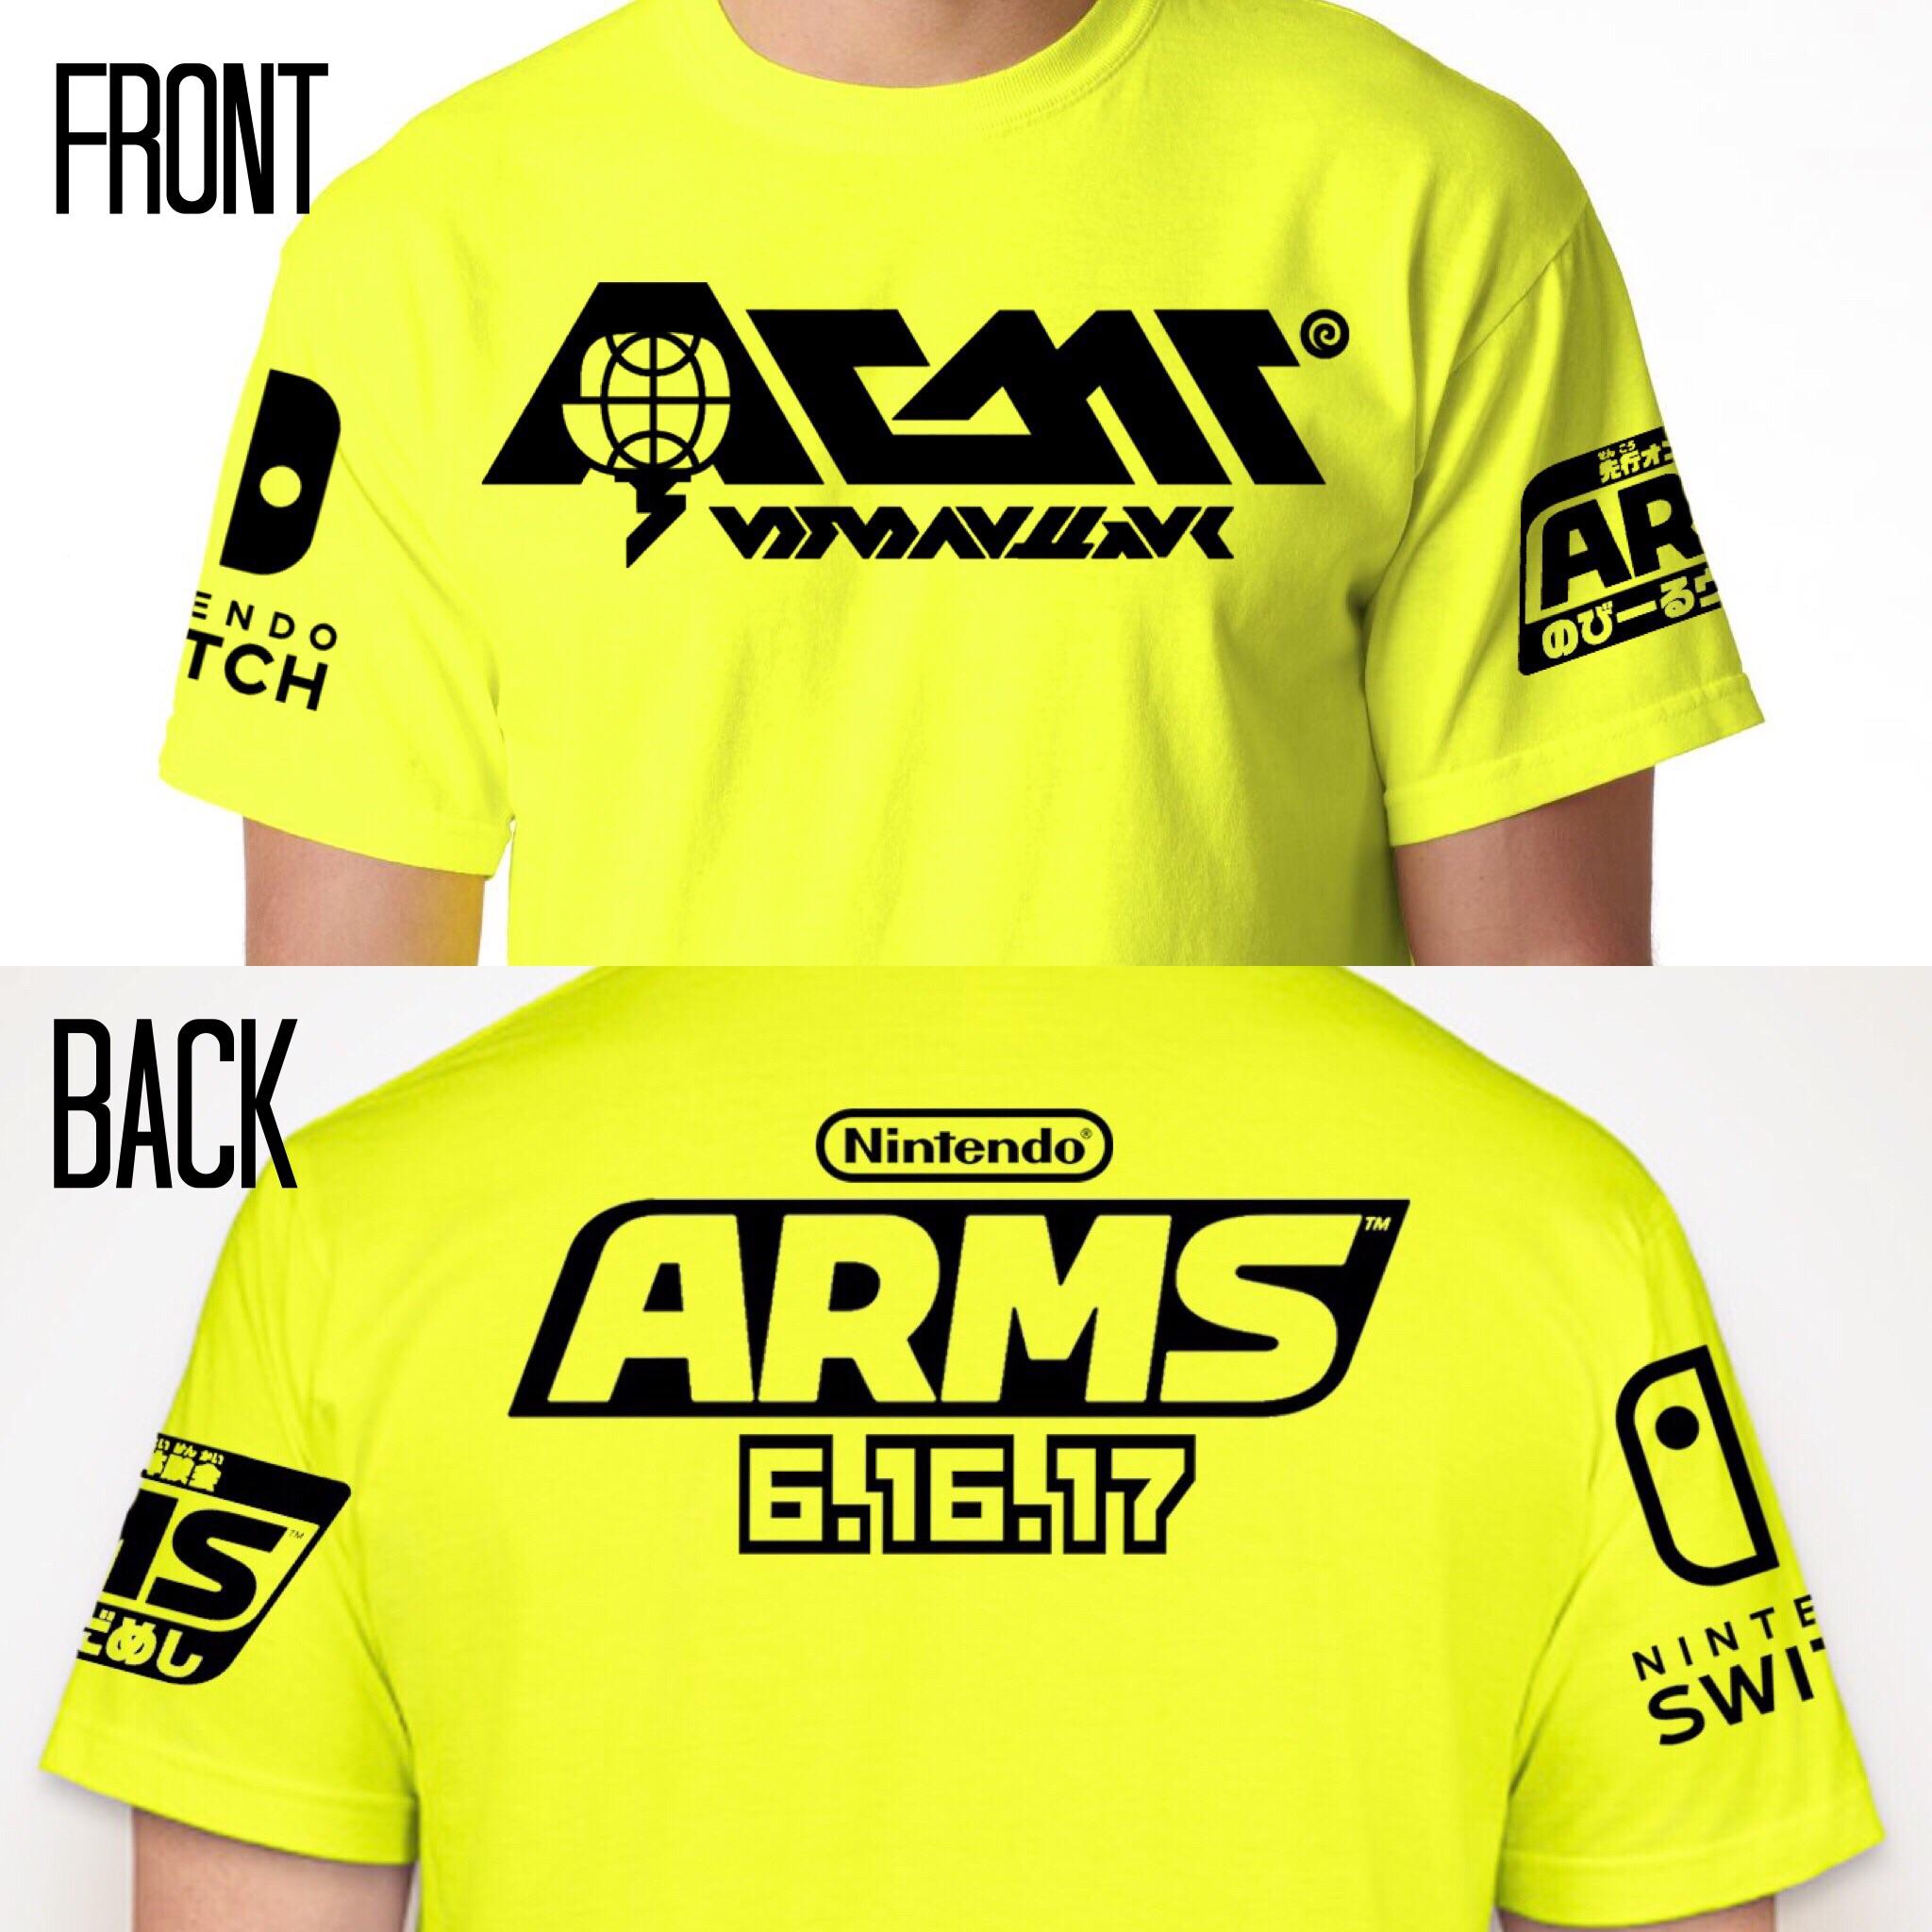 Whipped up an ARMS launch day shirt for my work.